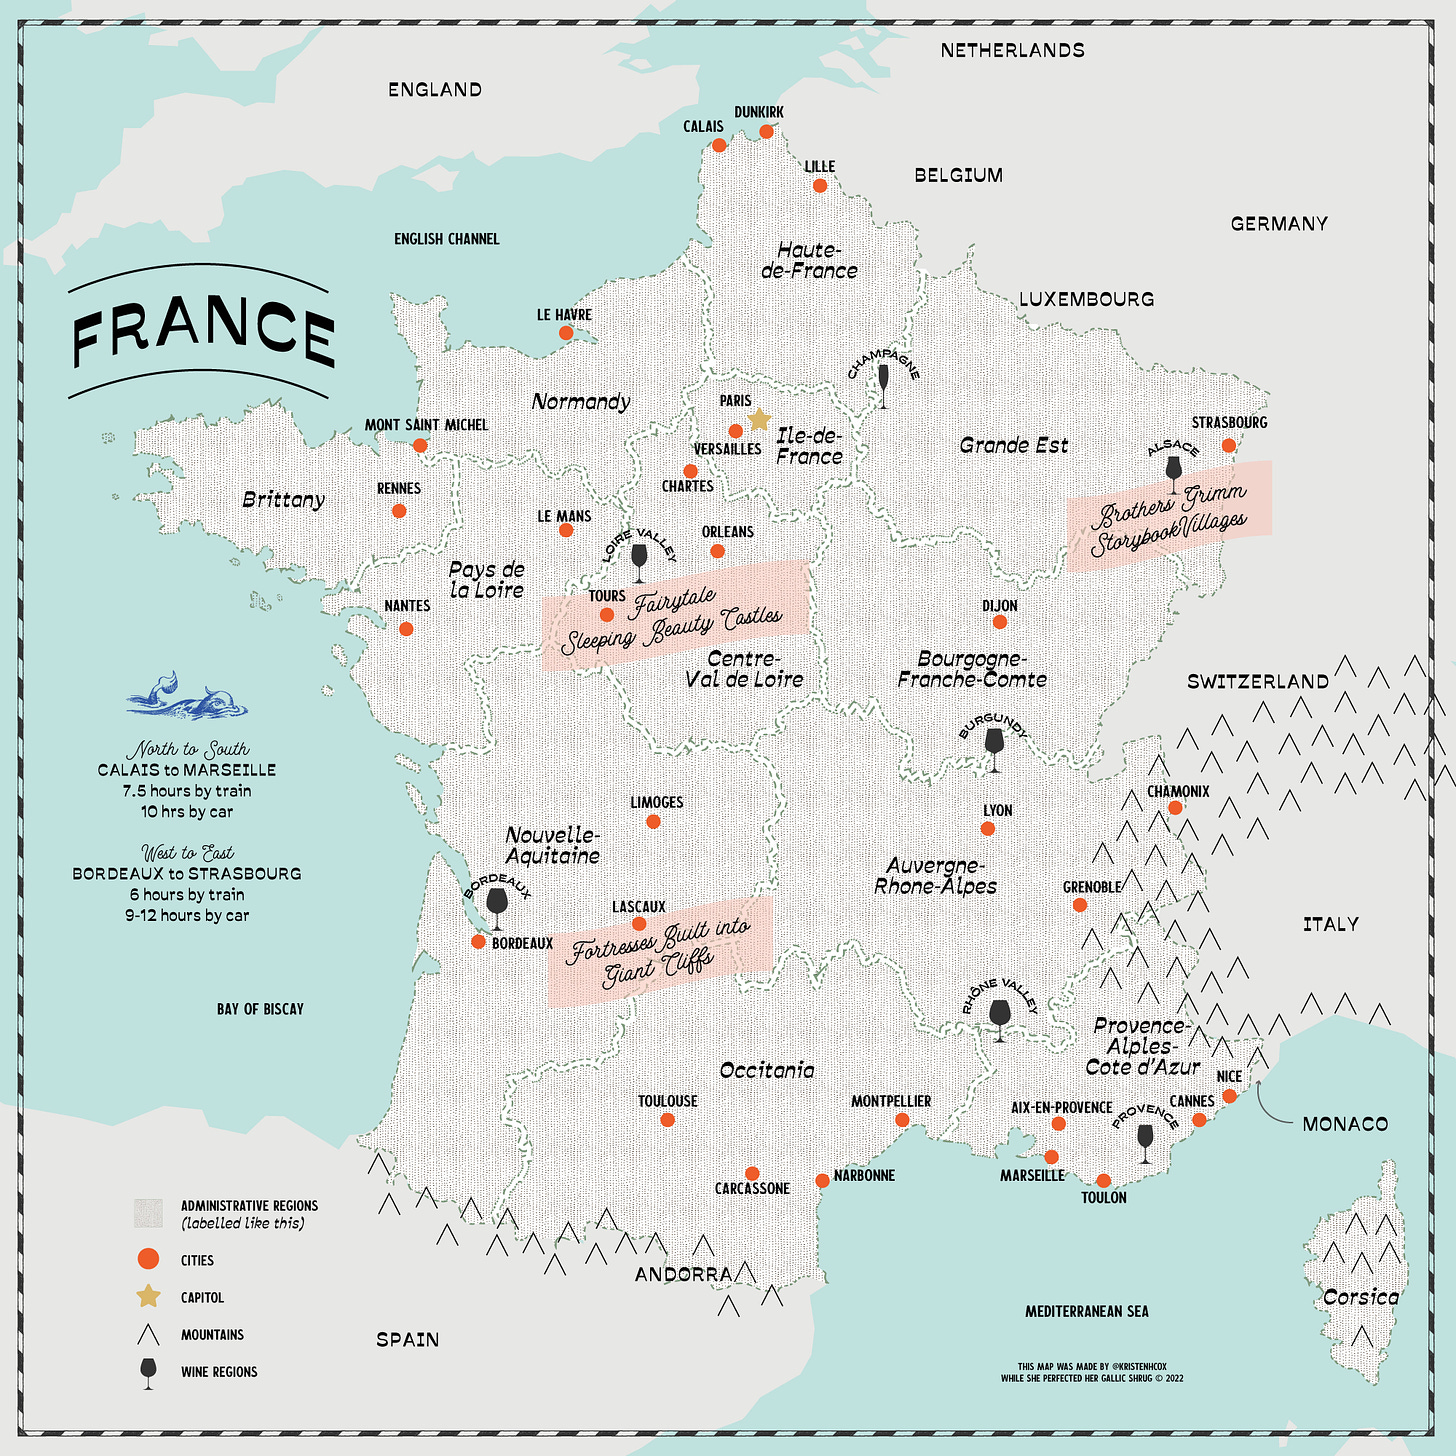 Map of France with labeled regions, cities, wine regions, mountains, and castles generalizations, oh my!